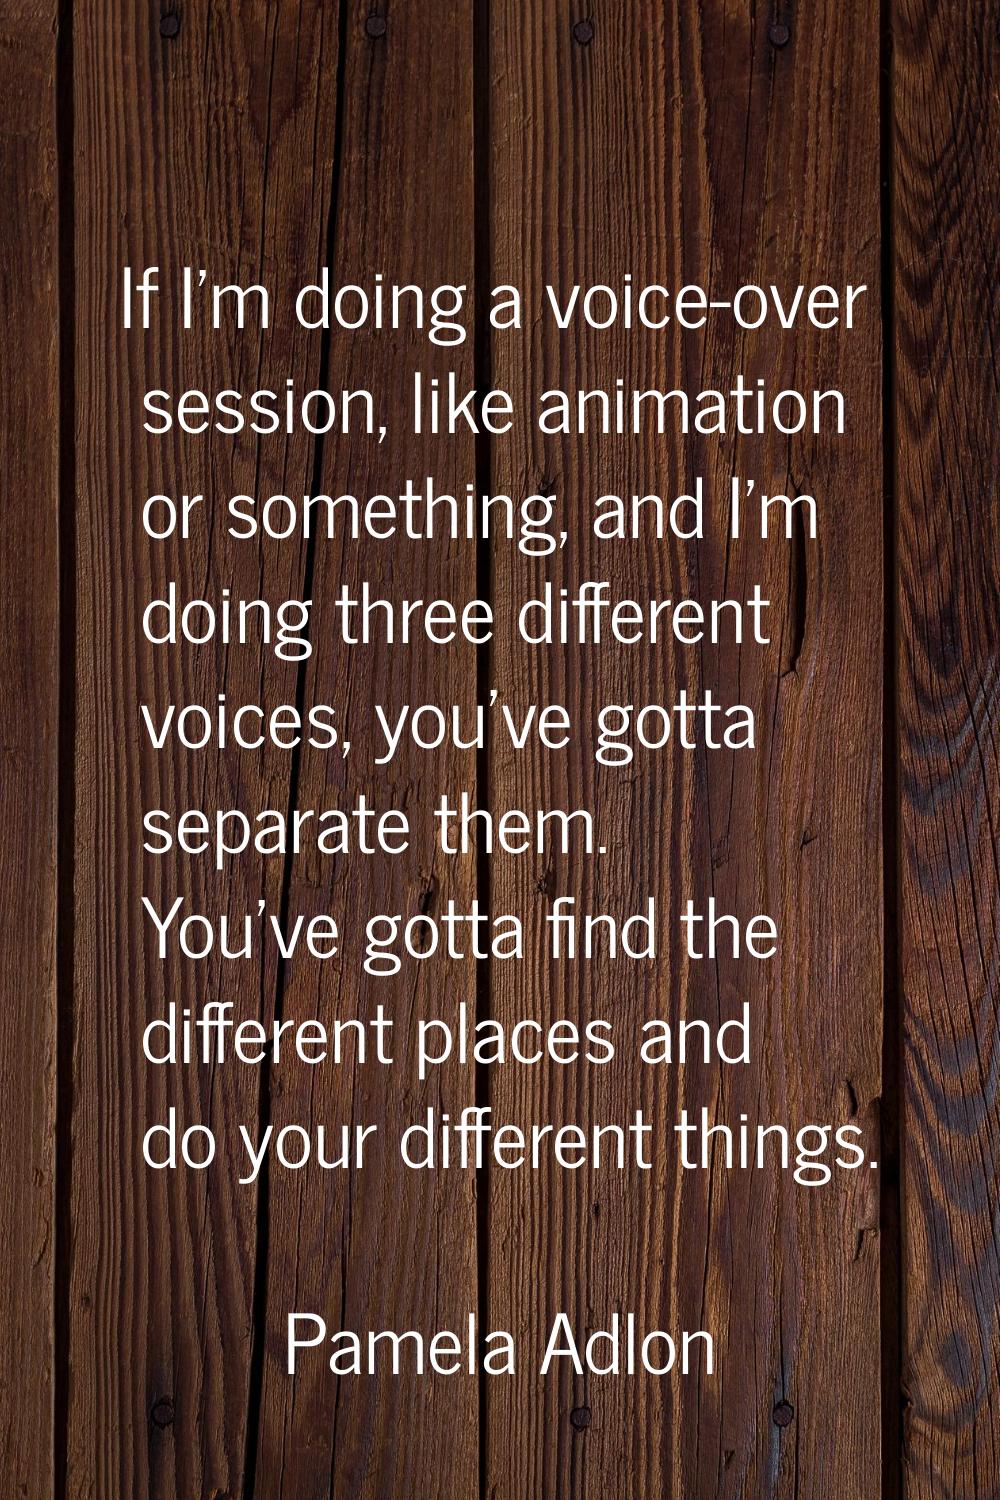 If I'm doing a voice-over session, like animation or something, and I'm doing three different voice